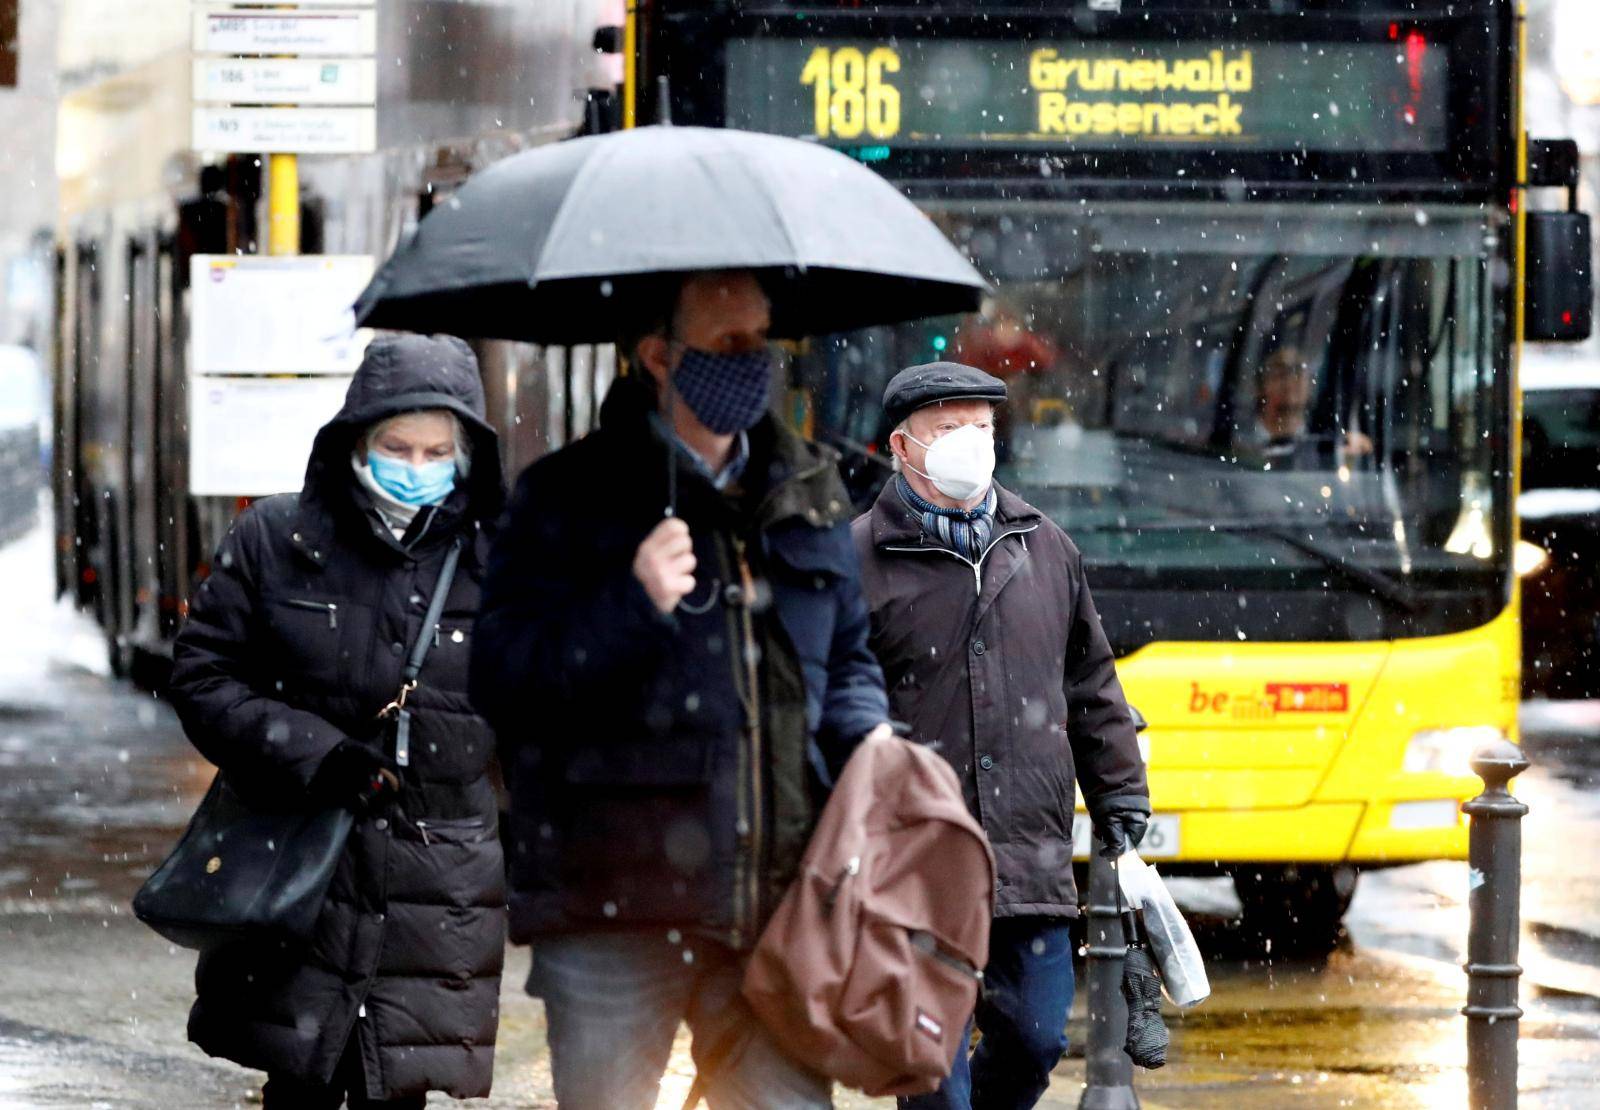 FILE PHOTO: People wear face masks as they walk past a bus in Berlin